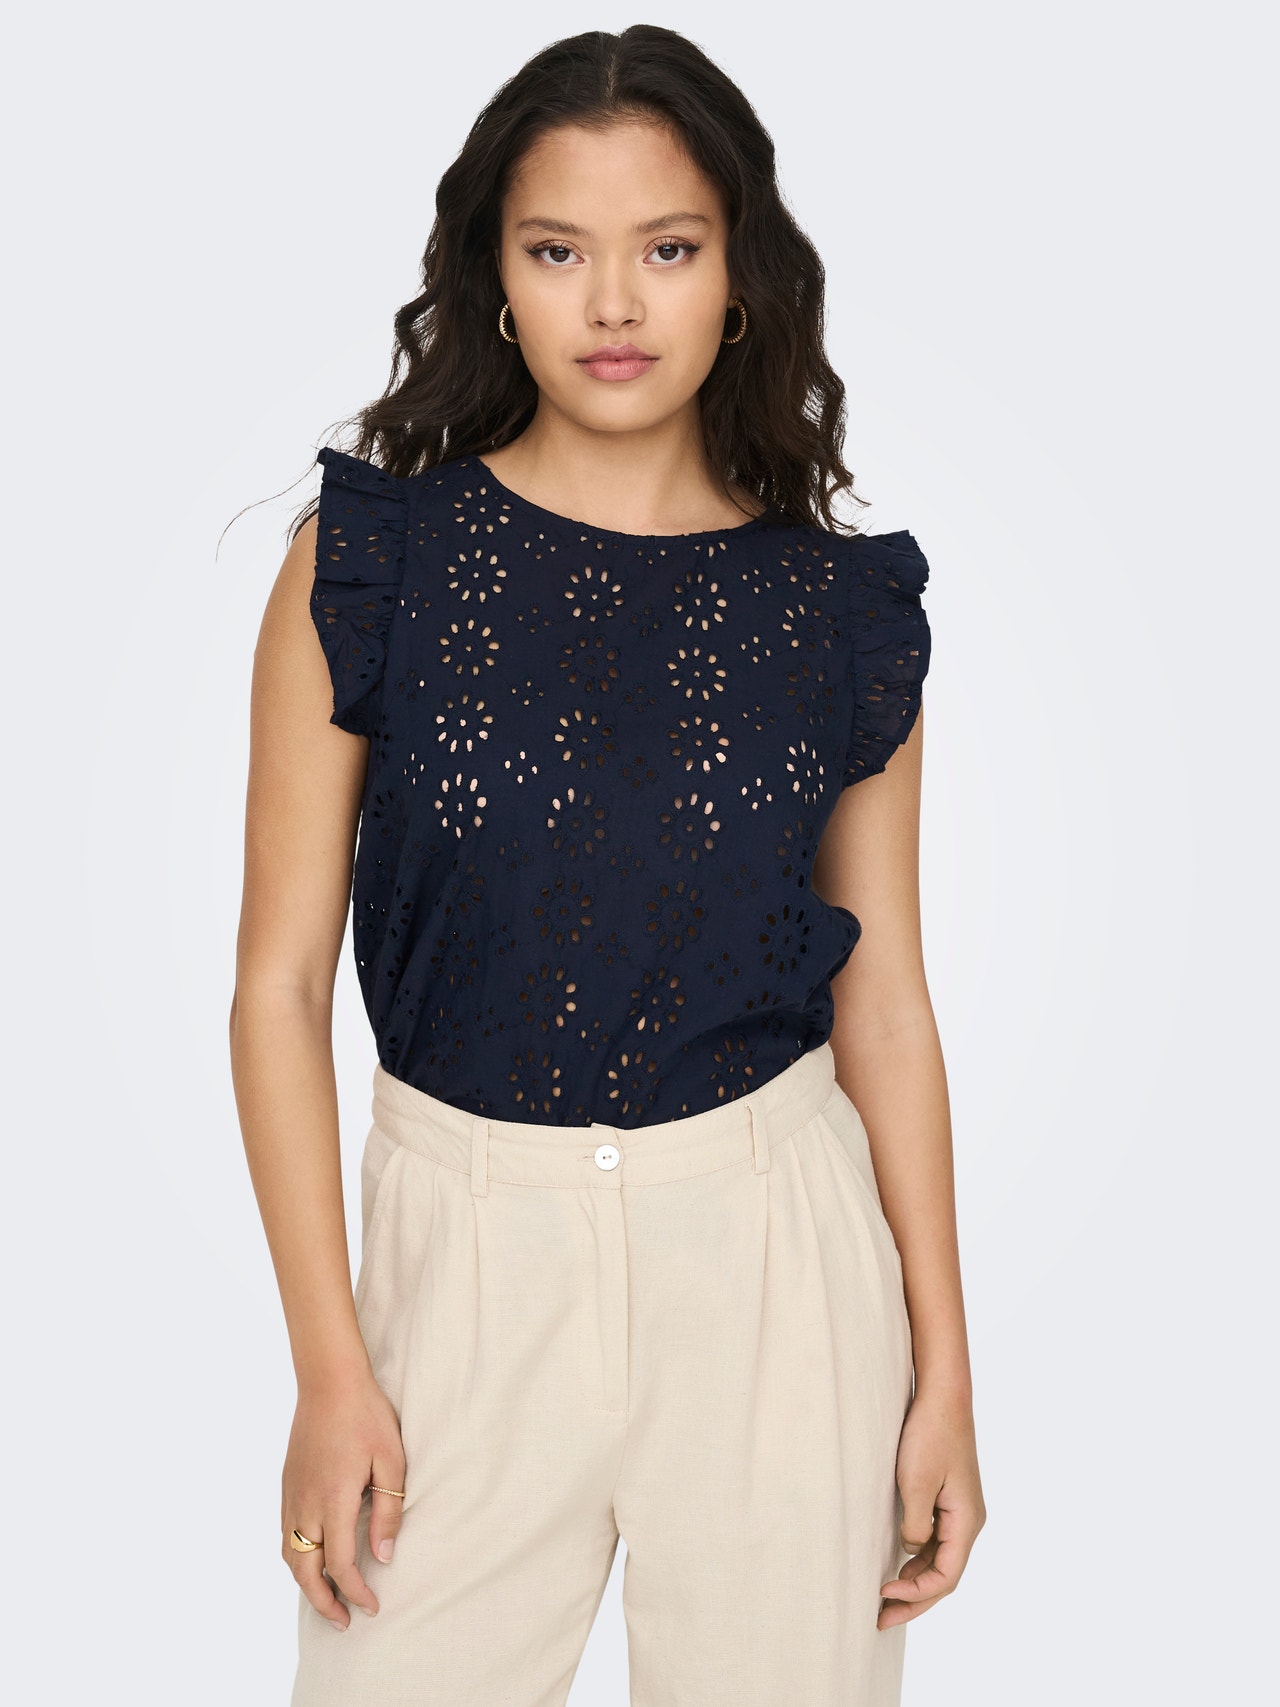 ONLY Embroidered top -Sky Captain - 15312383